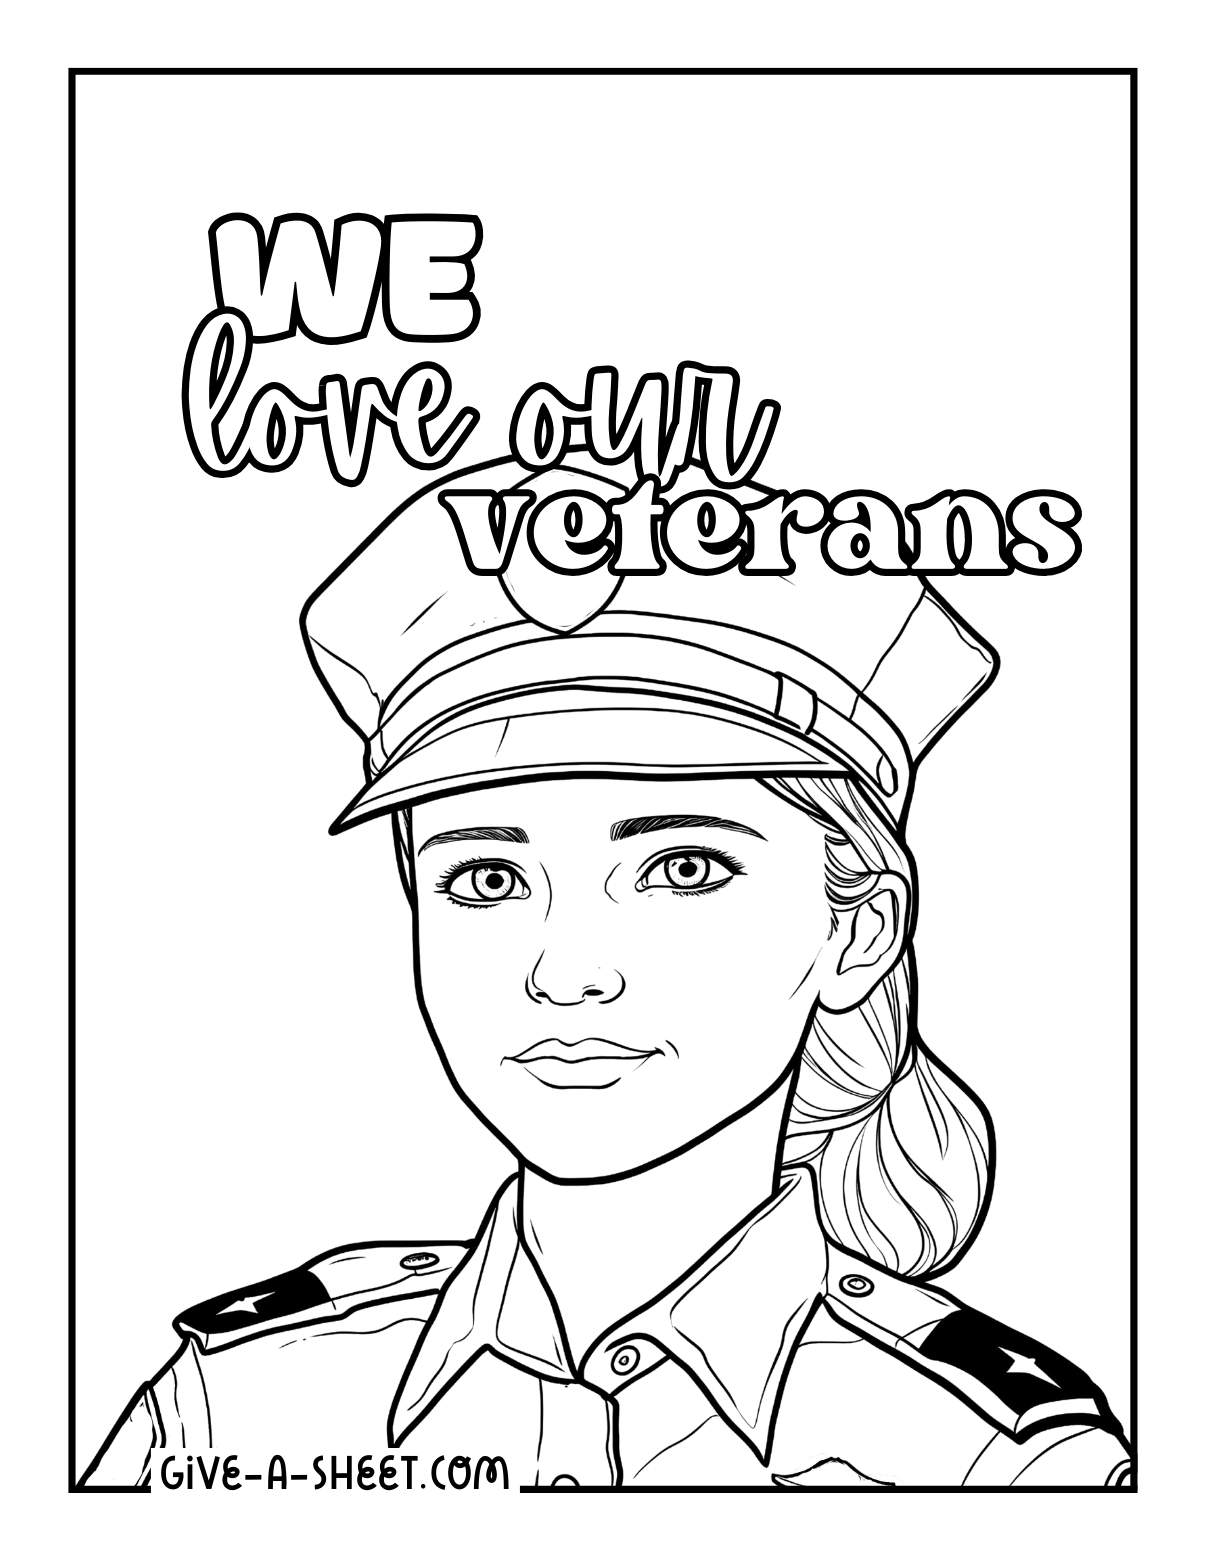 Woman armed forces veterans day coloring page.